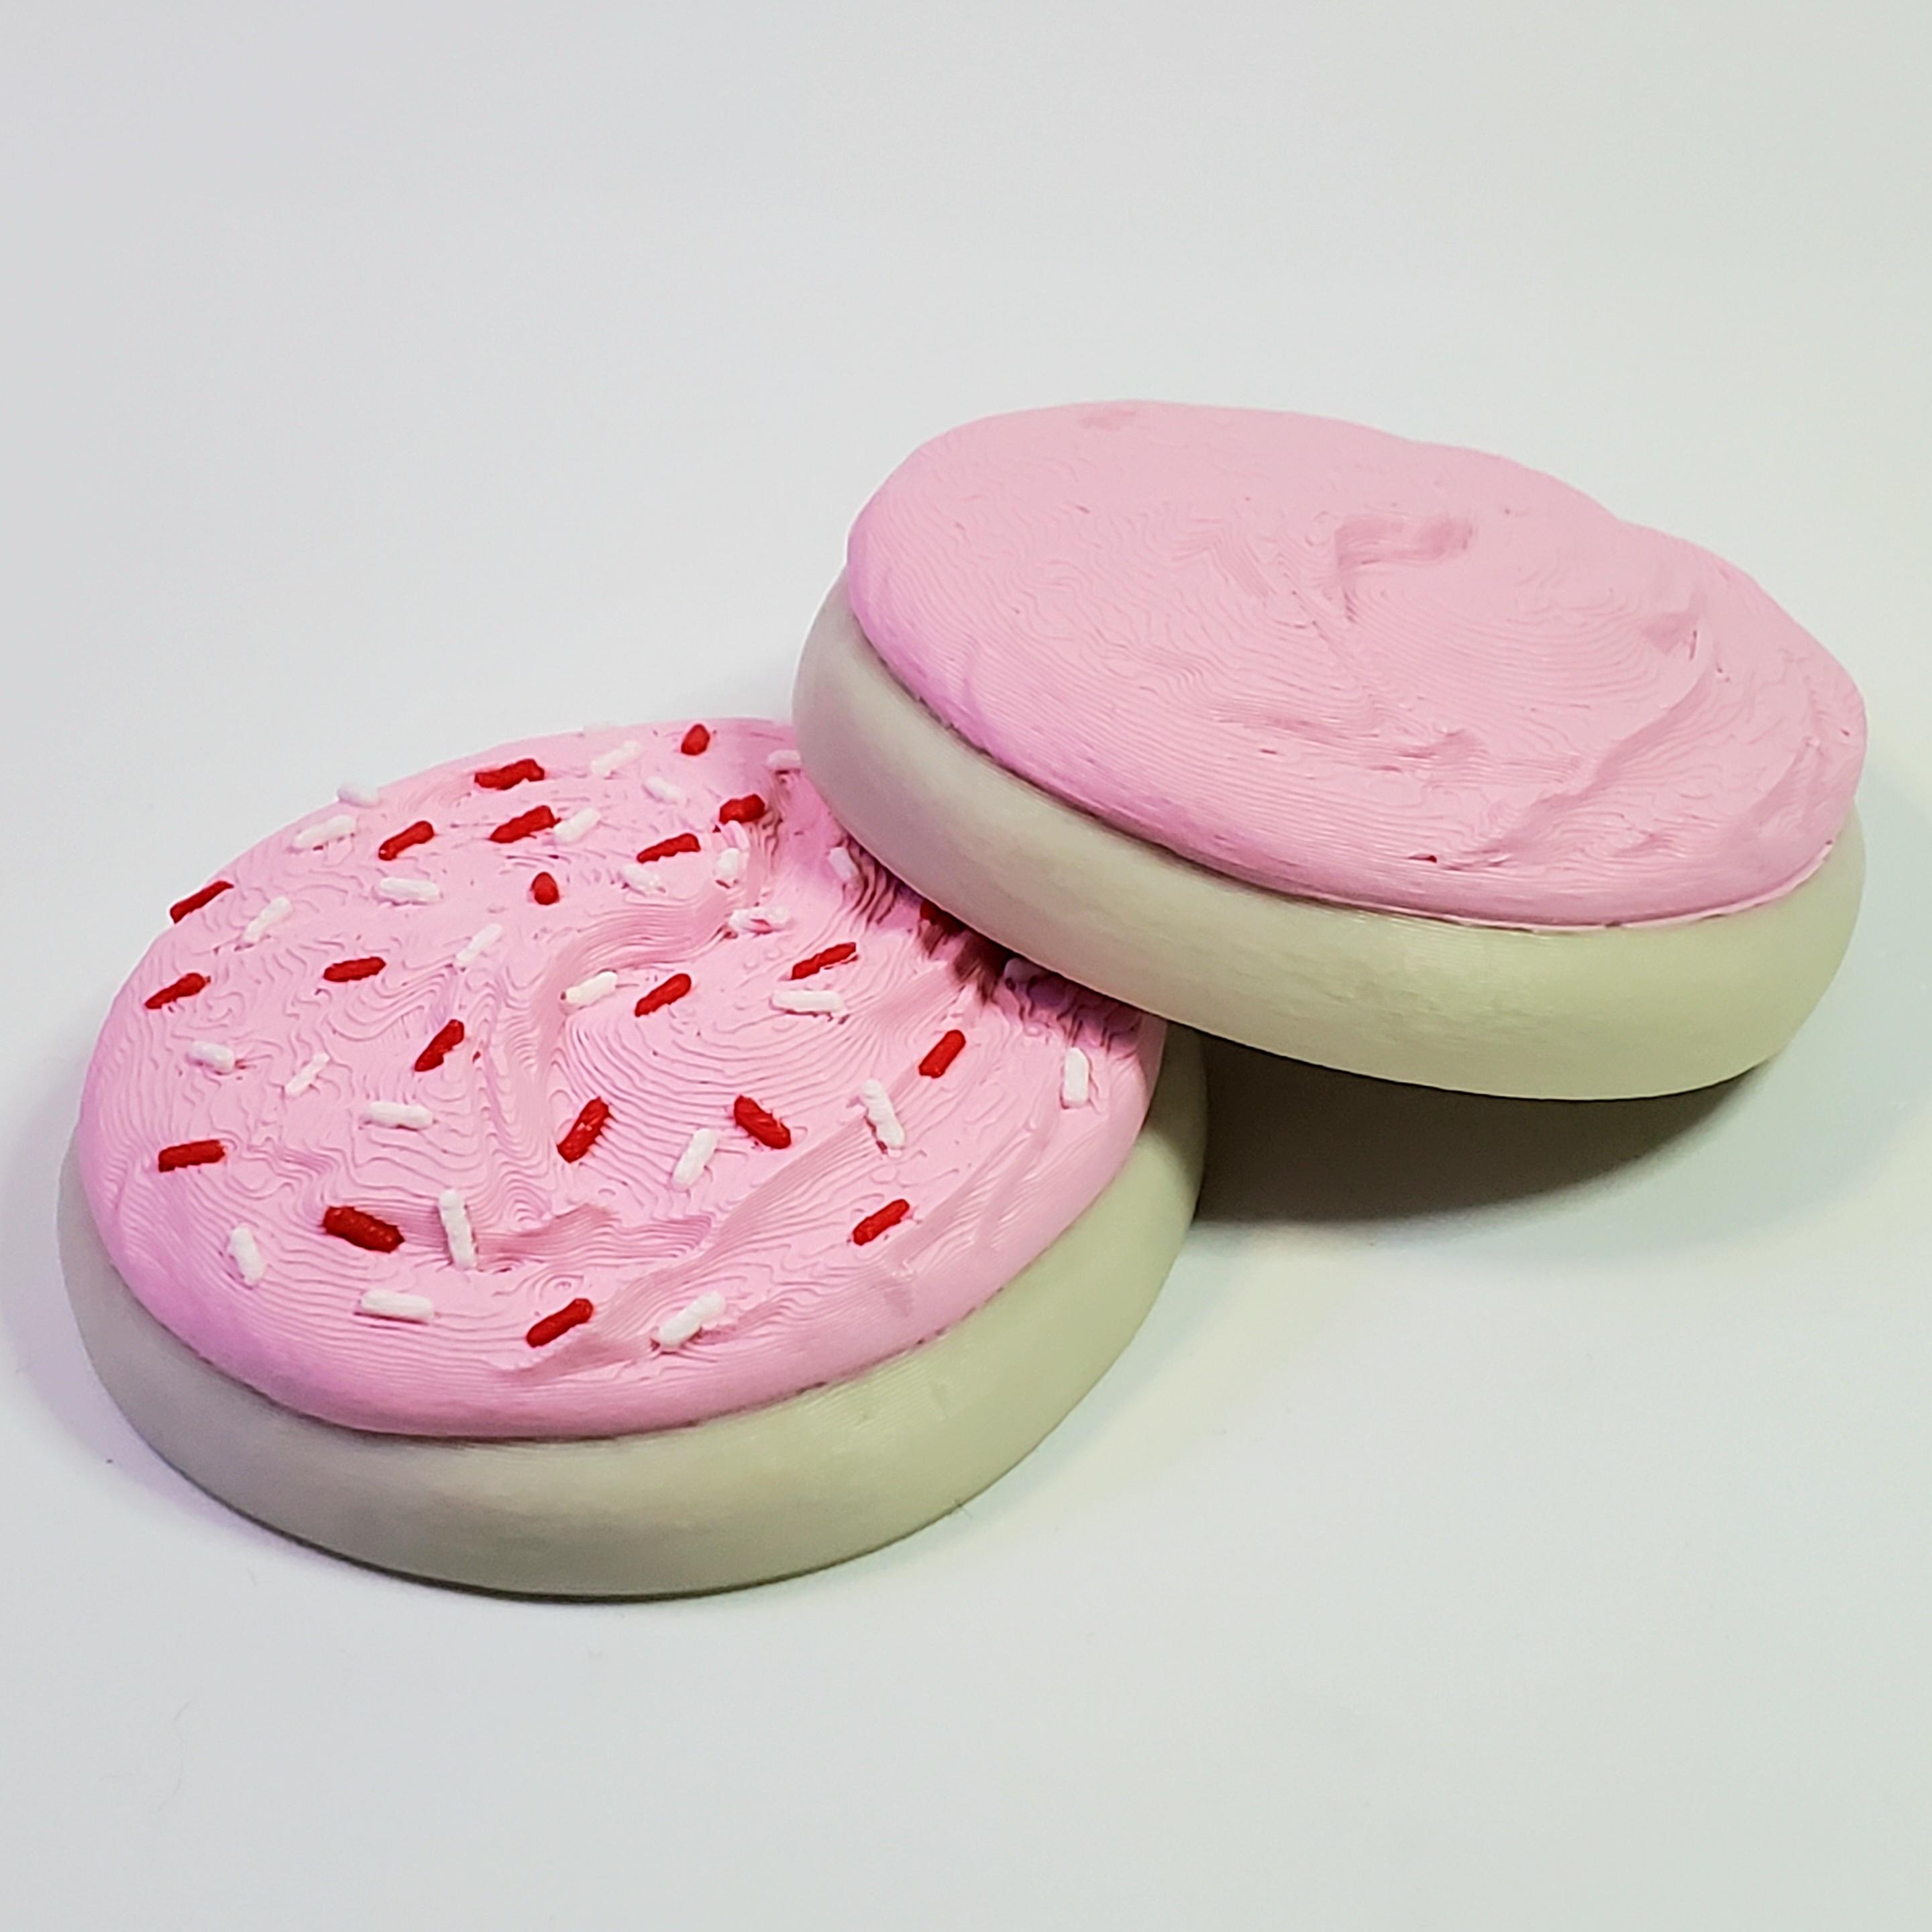 REMIXABLE Sugar Cookie with Buttermilk Frosting :: Delicious Desserts! 3d model